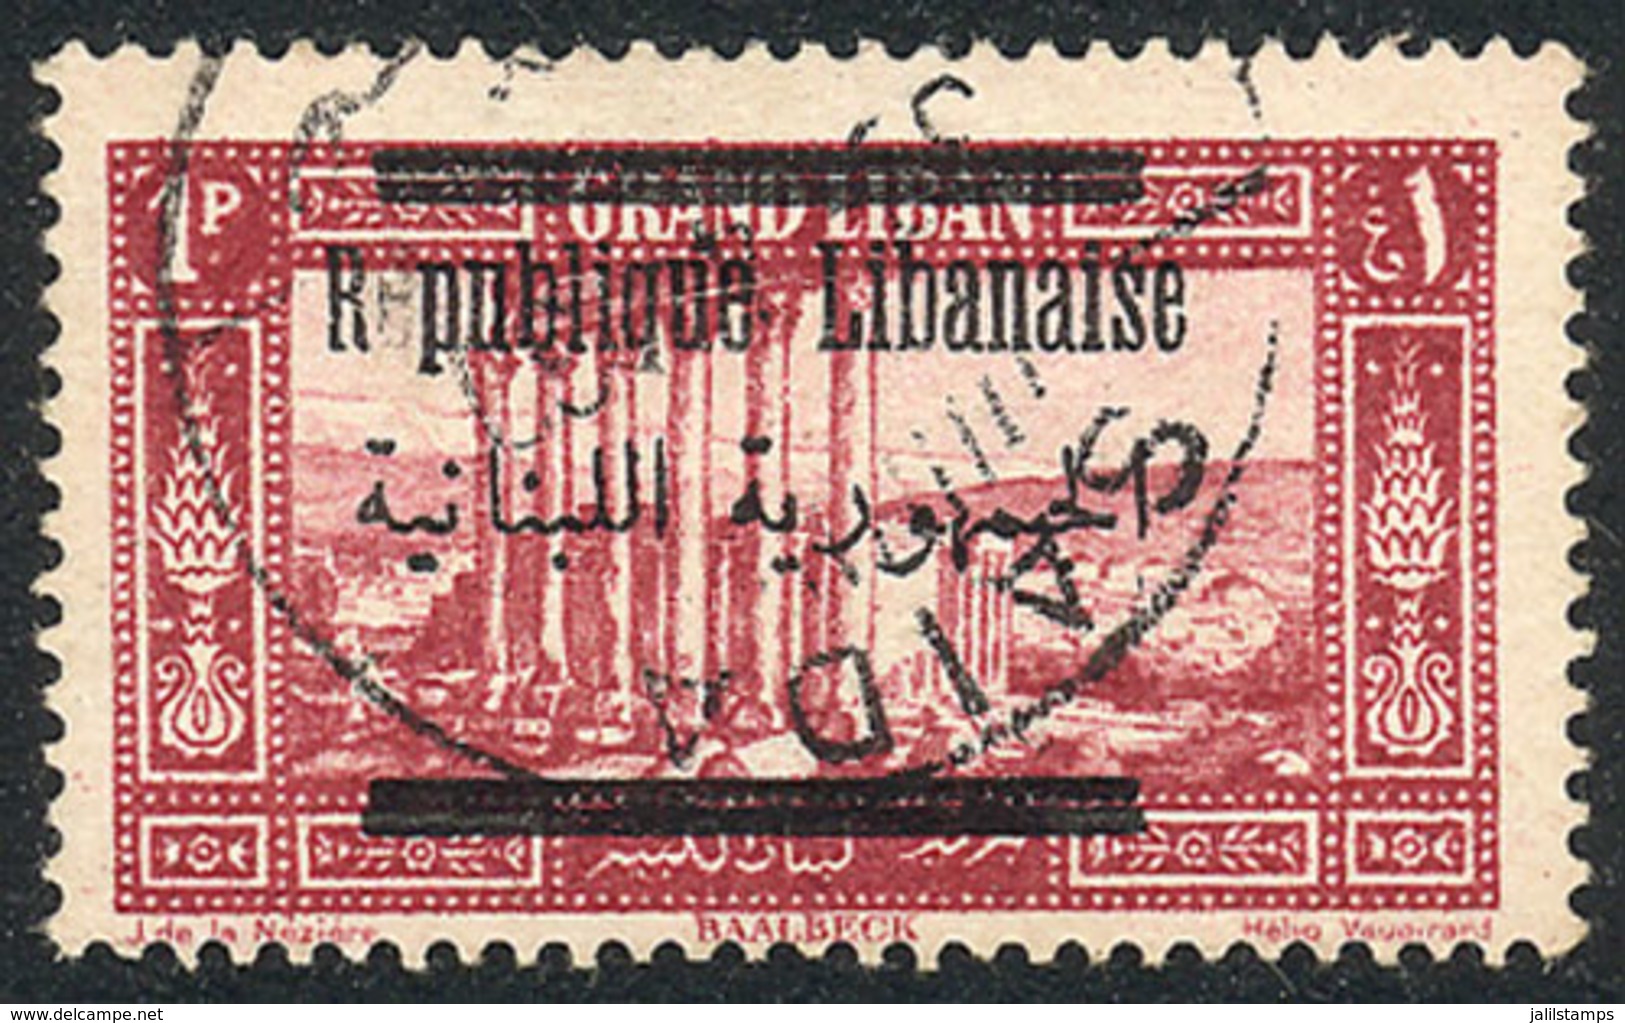 LEBANON: Yvert 86, With "R Publique" Variety, VF Quality!" - Liban